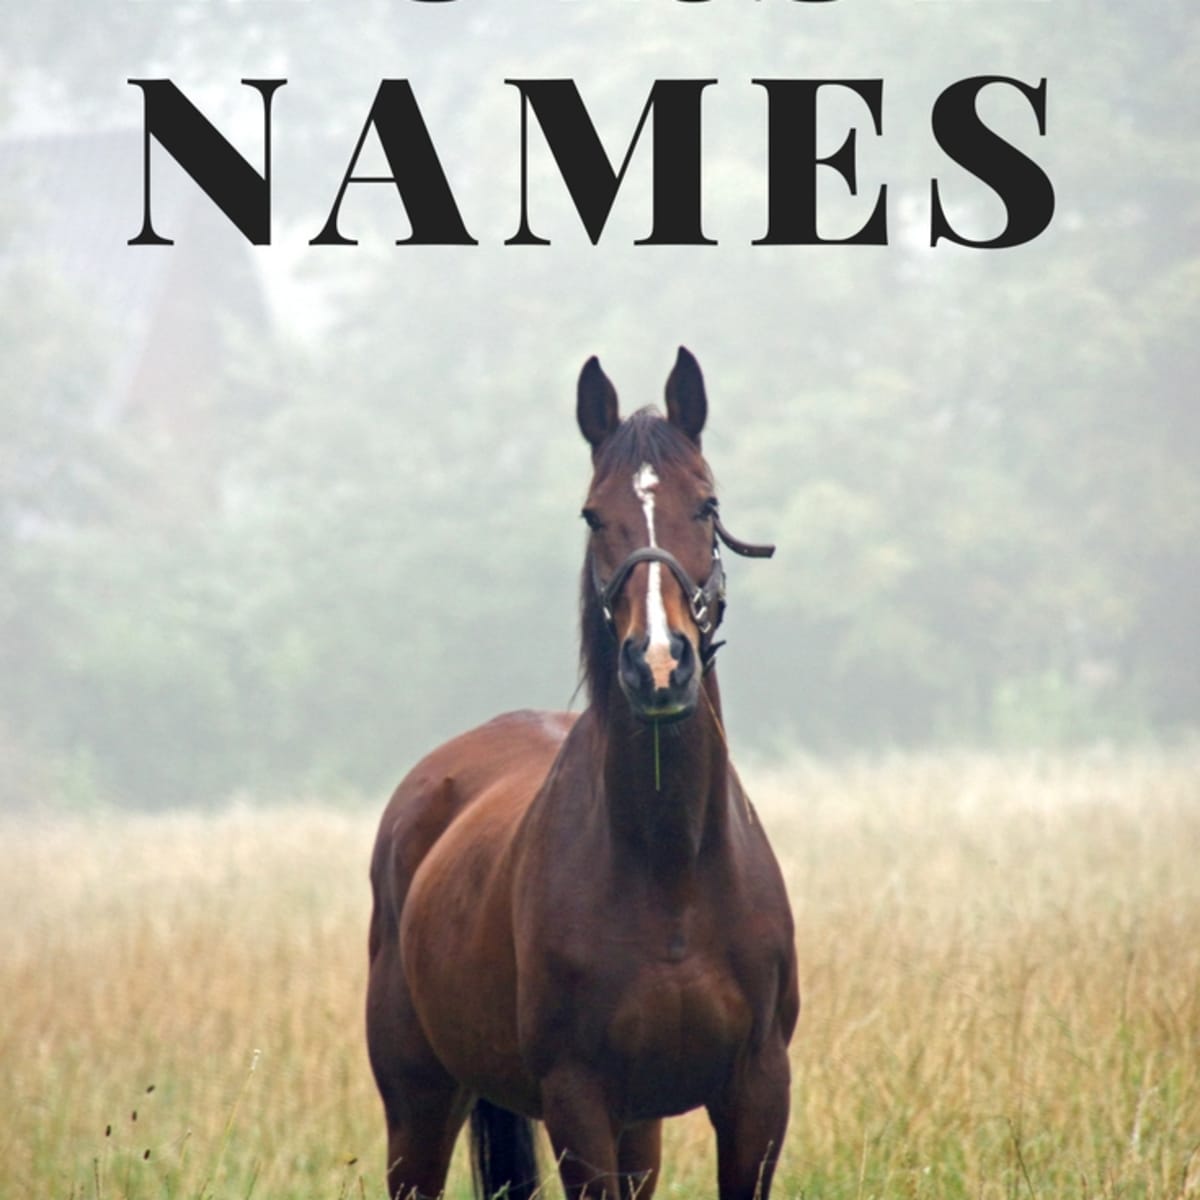 250+ Awesome Horse and Racehorse Names - PetHelpful